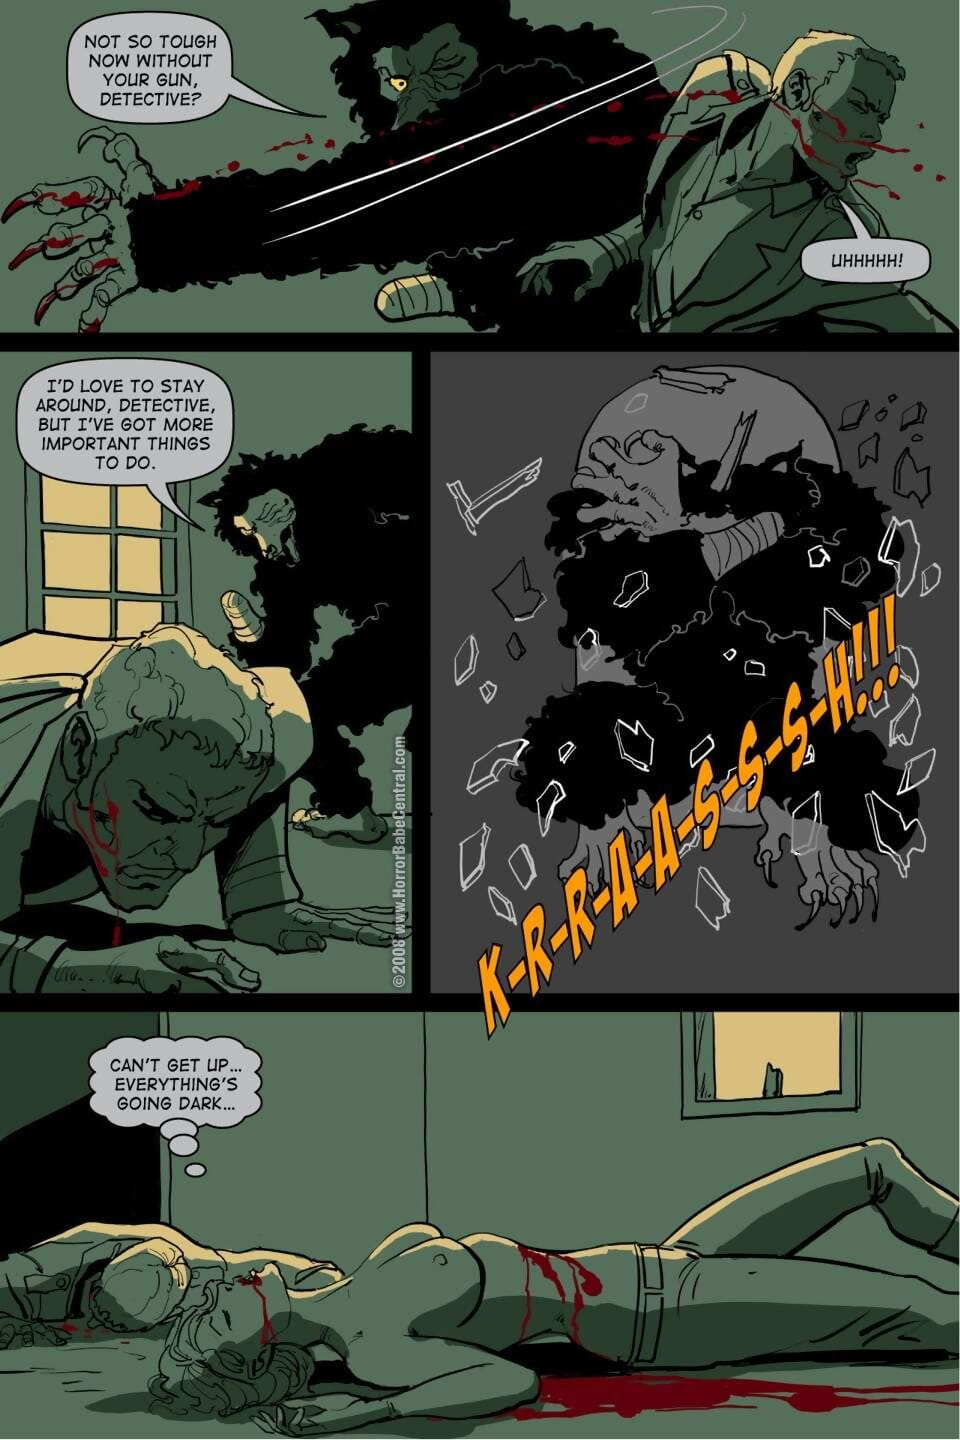 Vampire City - part 5 page 1